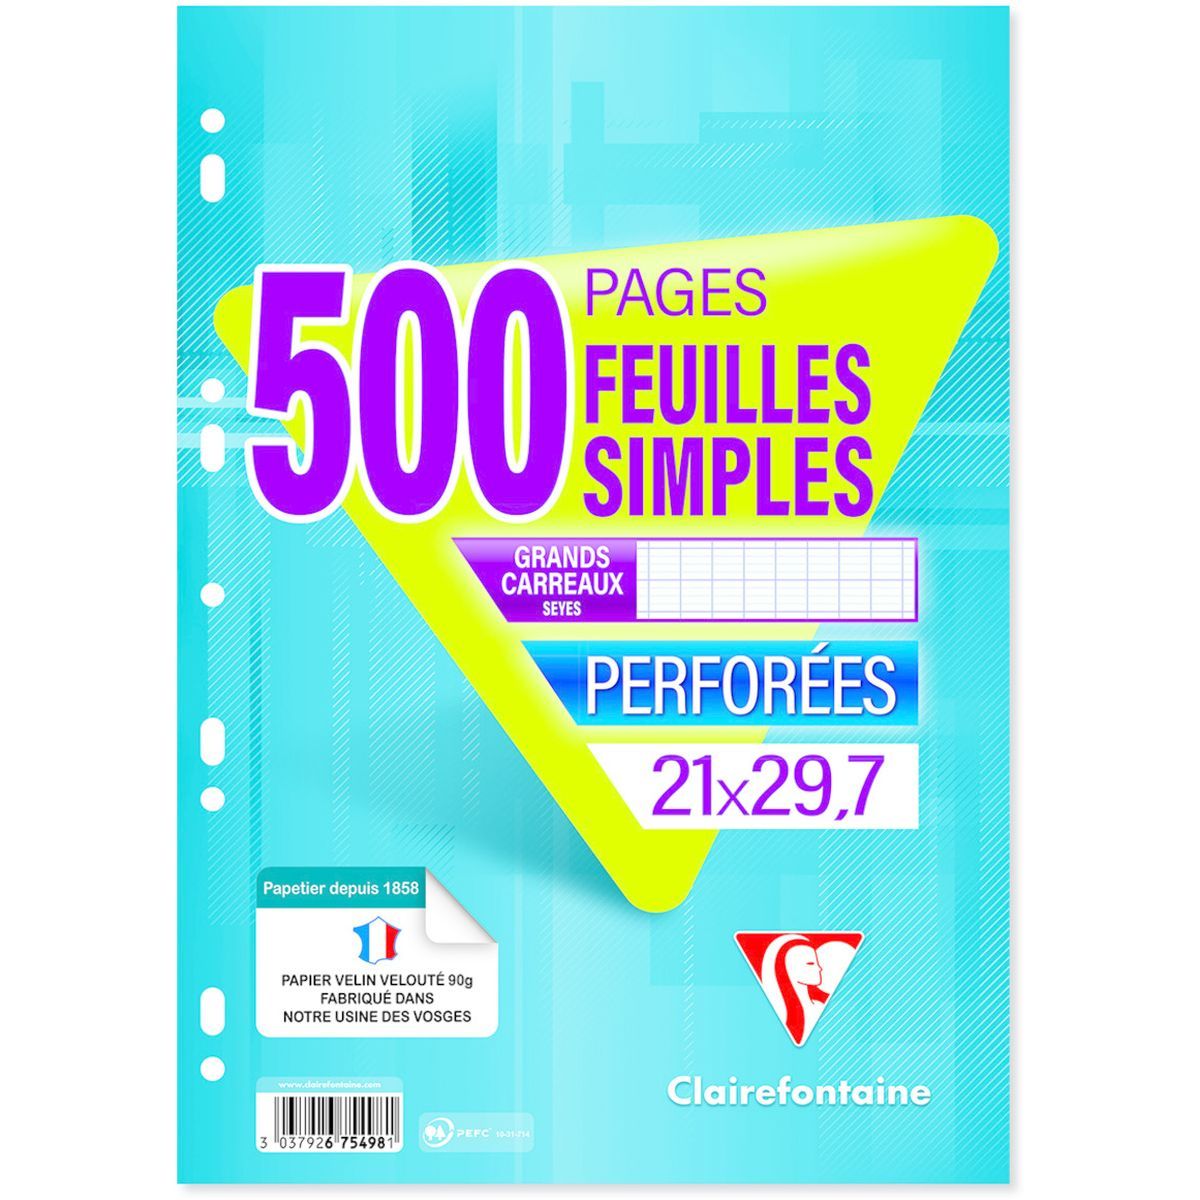 CLAIREFONTAINE Feuillets simples A4 grands carreaux seyes 400pages 4  couleurs Clairefontaine pas cher 